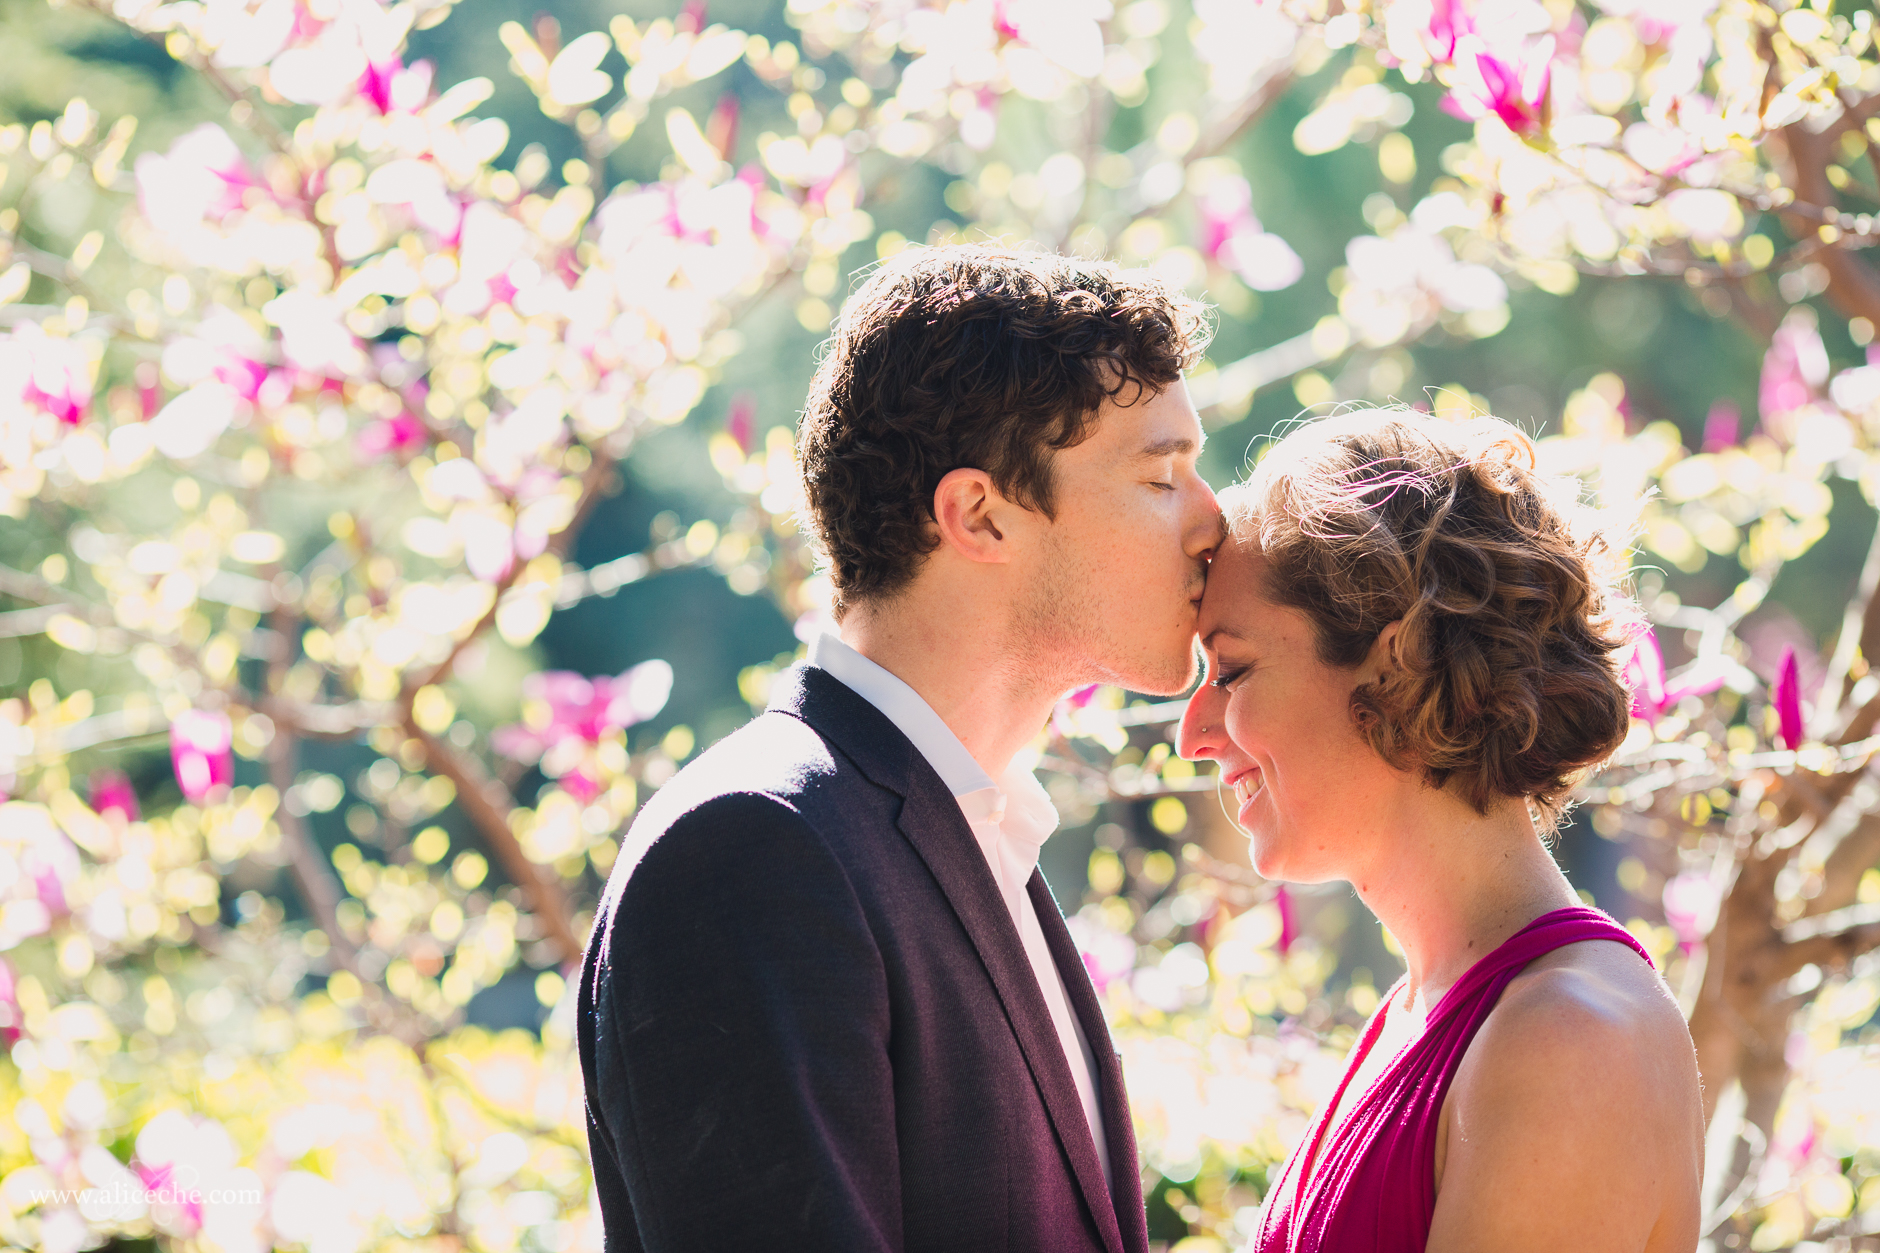 alice-che-photography-palo-alto-anniversary-session-husband-kissing-wife-on-forehead-flower-backdrop